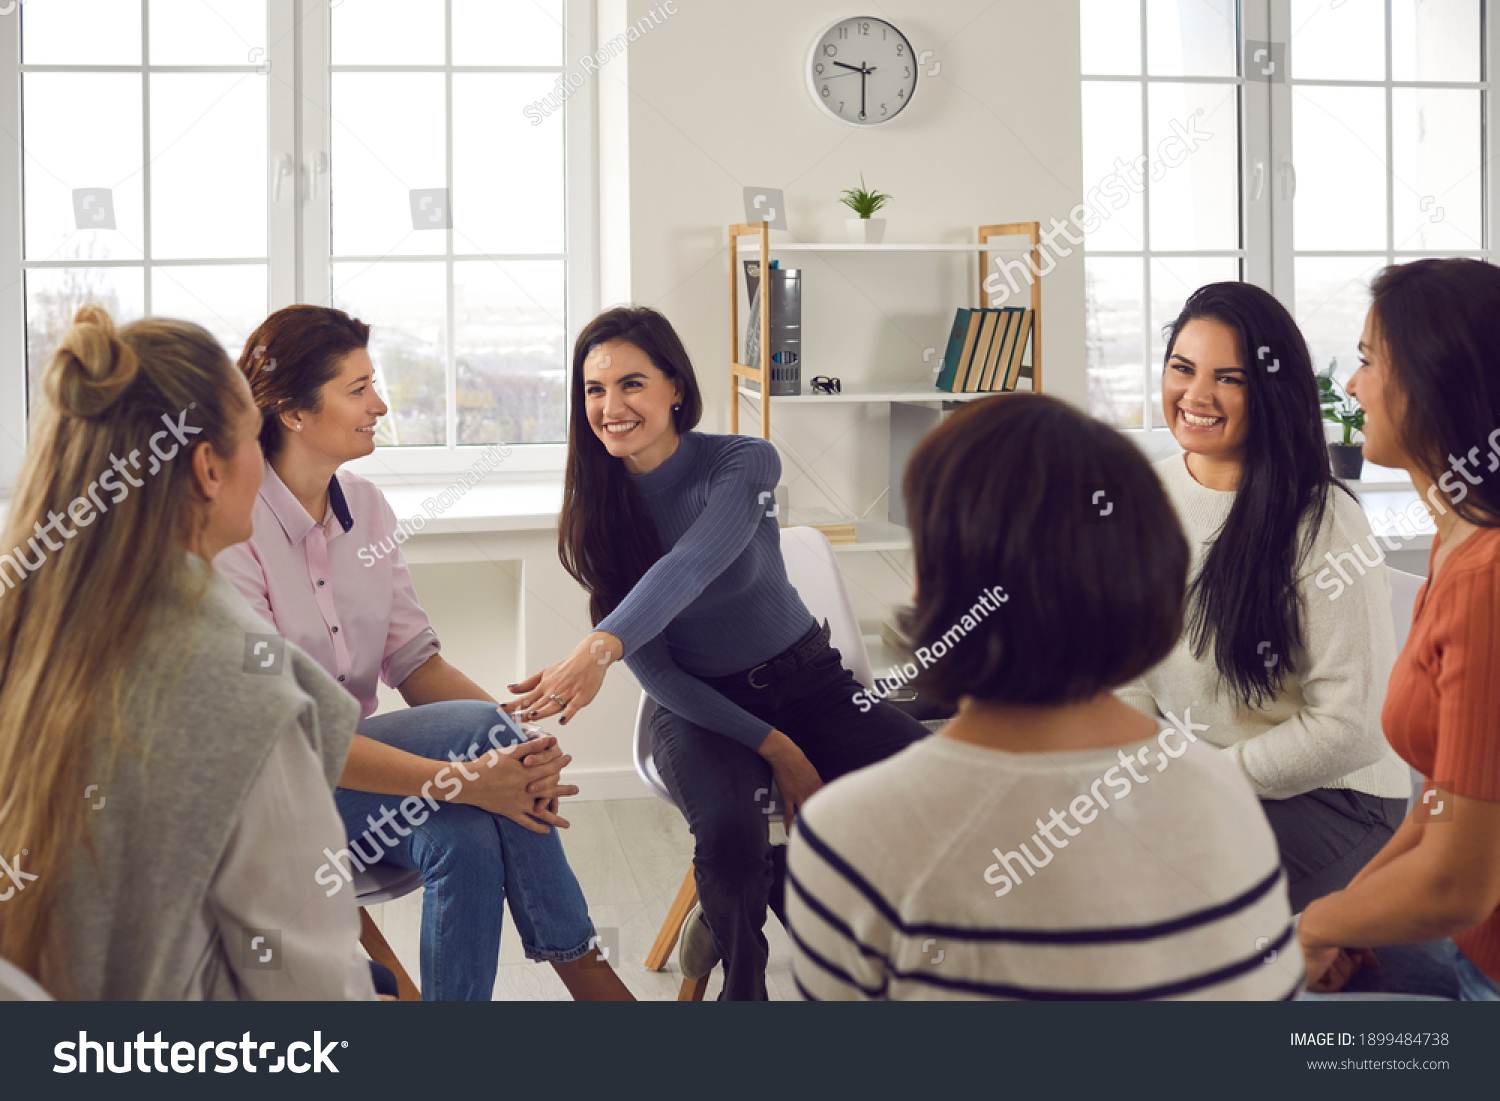 Happy positive smiling female coach, therapist or business team manager supporting and motivating young women in group therapy session or corporate staff training meeting at work #1899484738